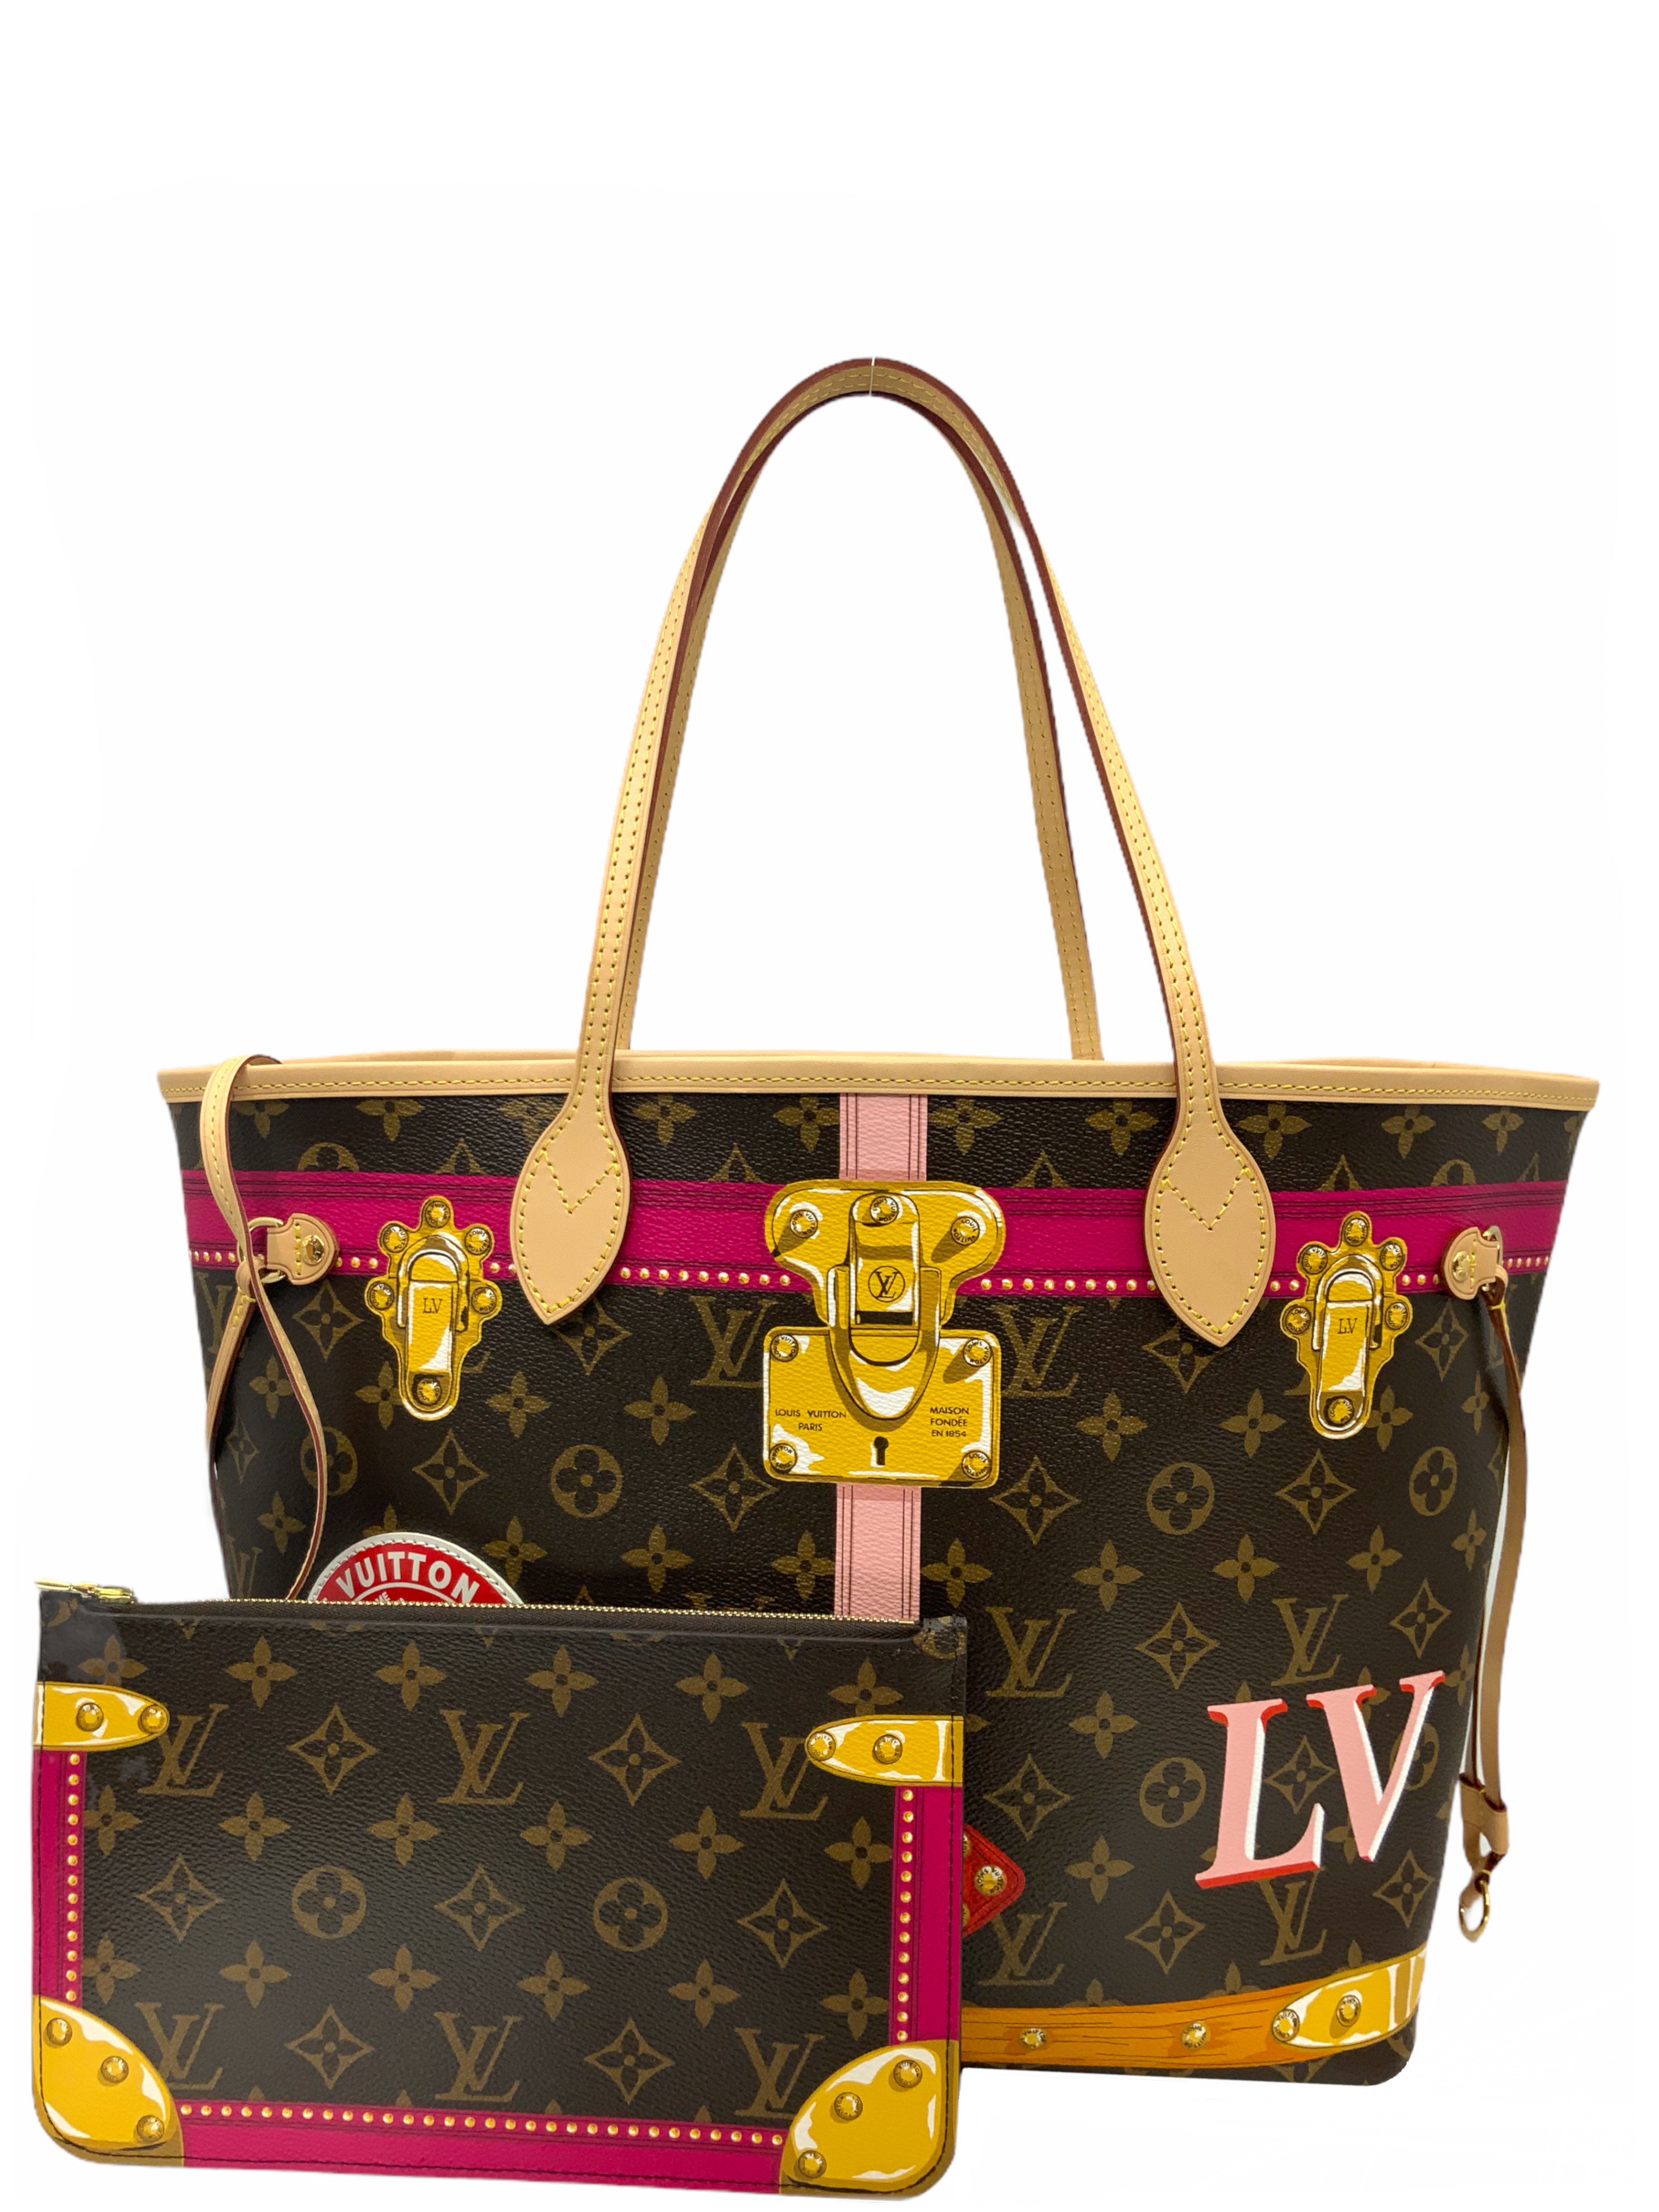 Summer Outfits Feat Lv Neverfull